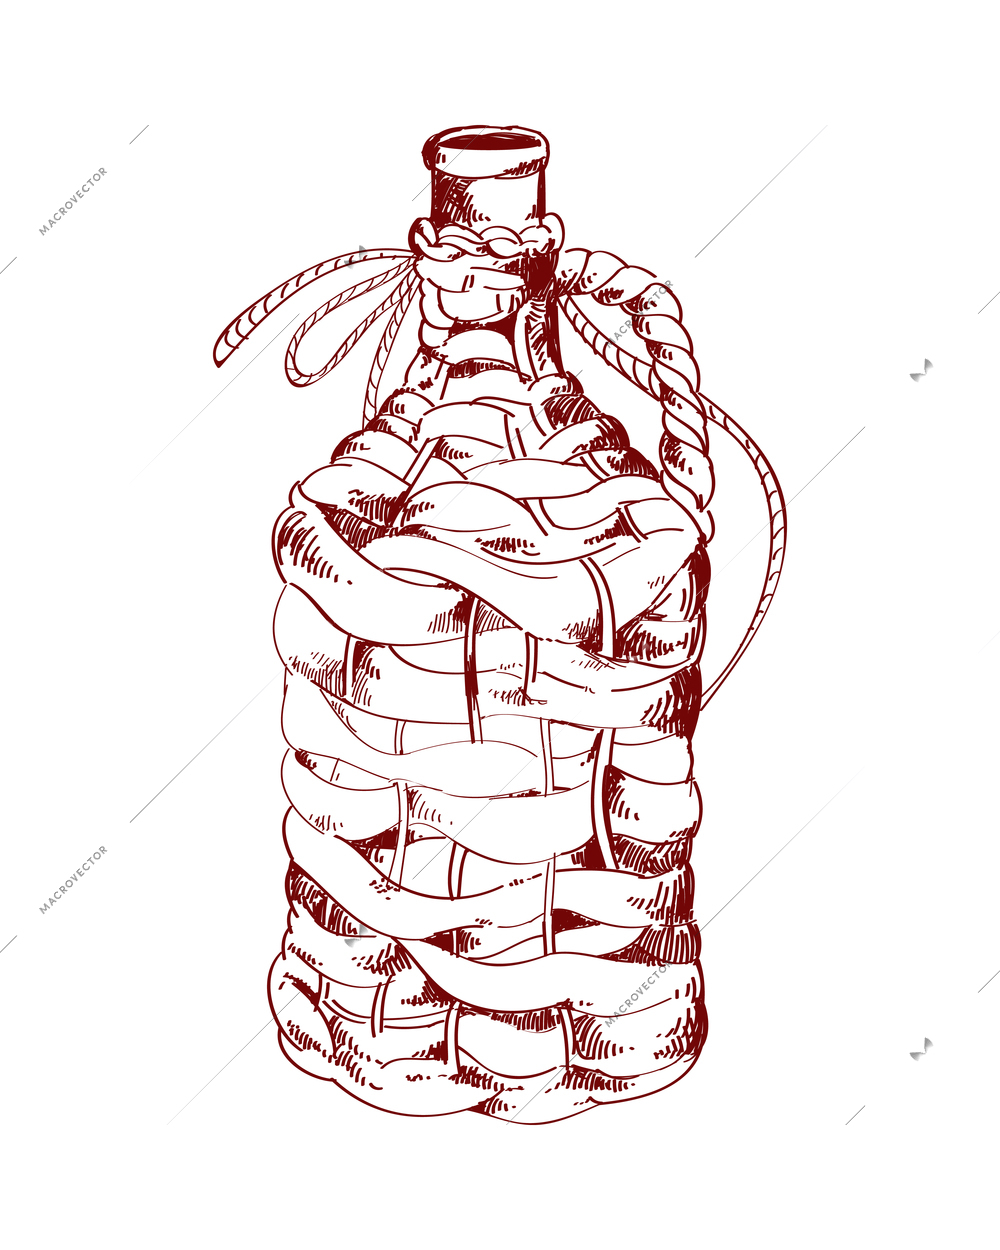 Wine composition with monochrome doodle style image on blank background vector illustration